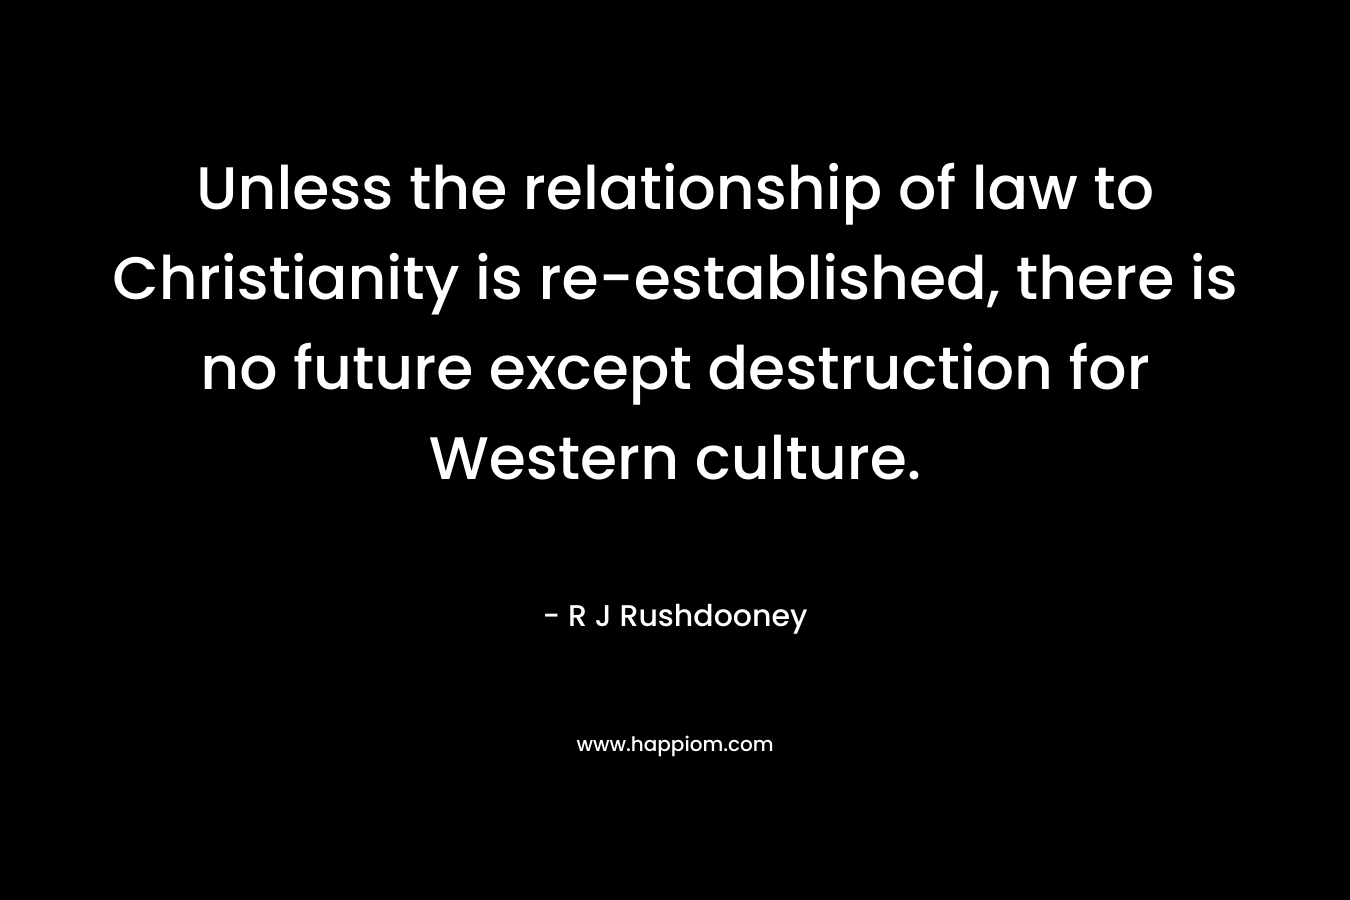 Unless the relationship of law to Christianity is re-established, there is no future except destruction for Western culture. – R J Rushdooney